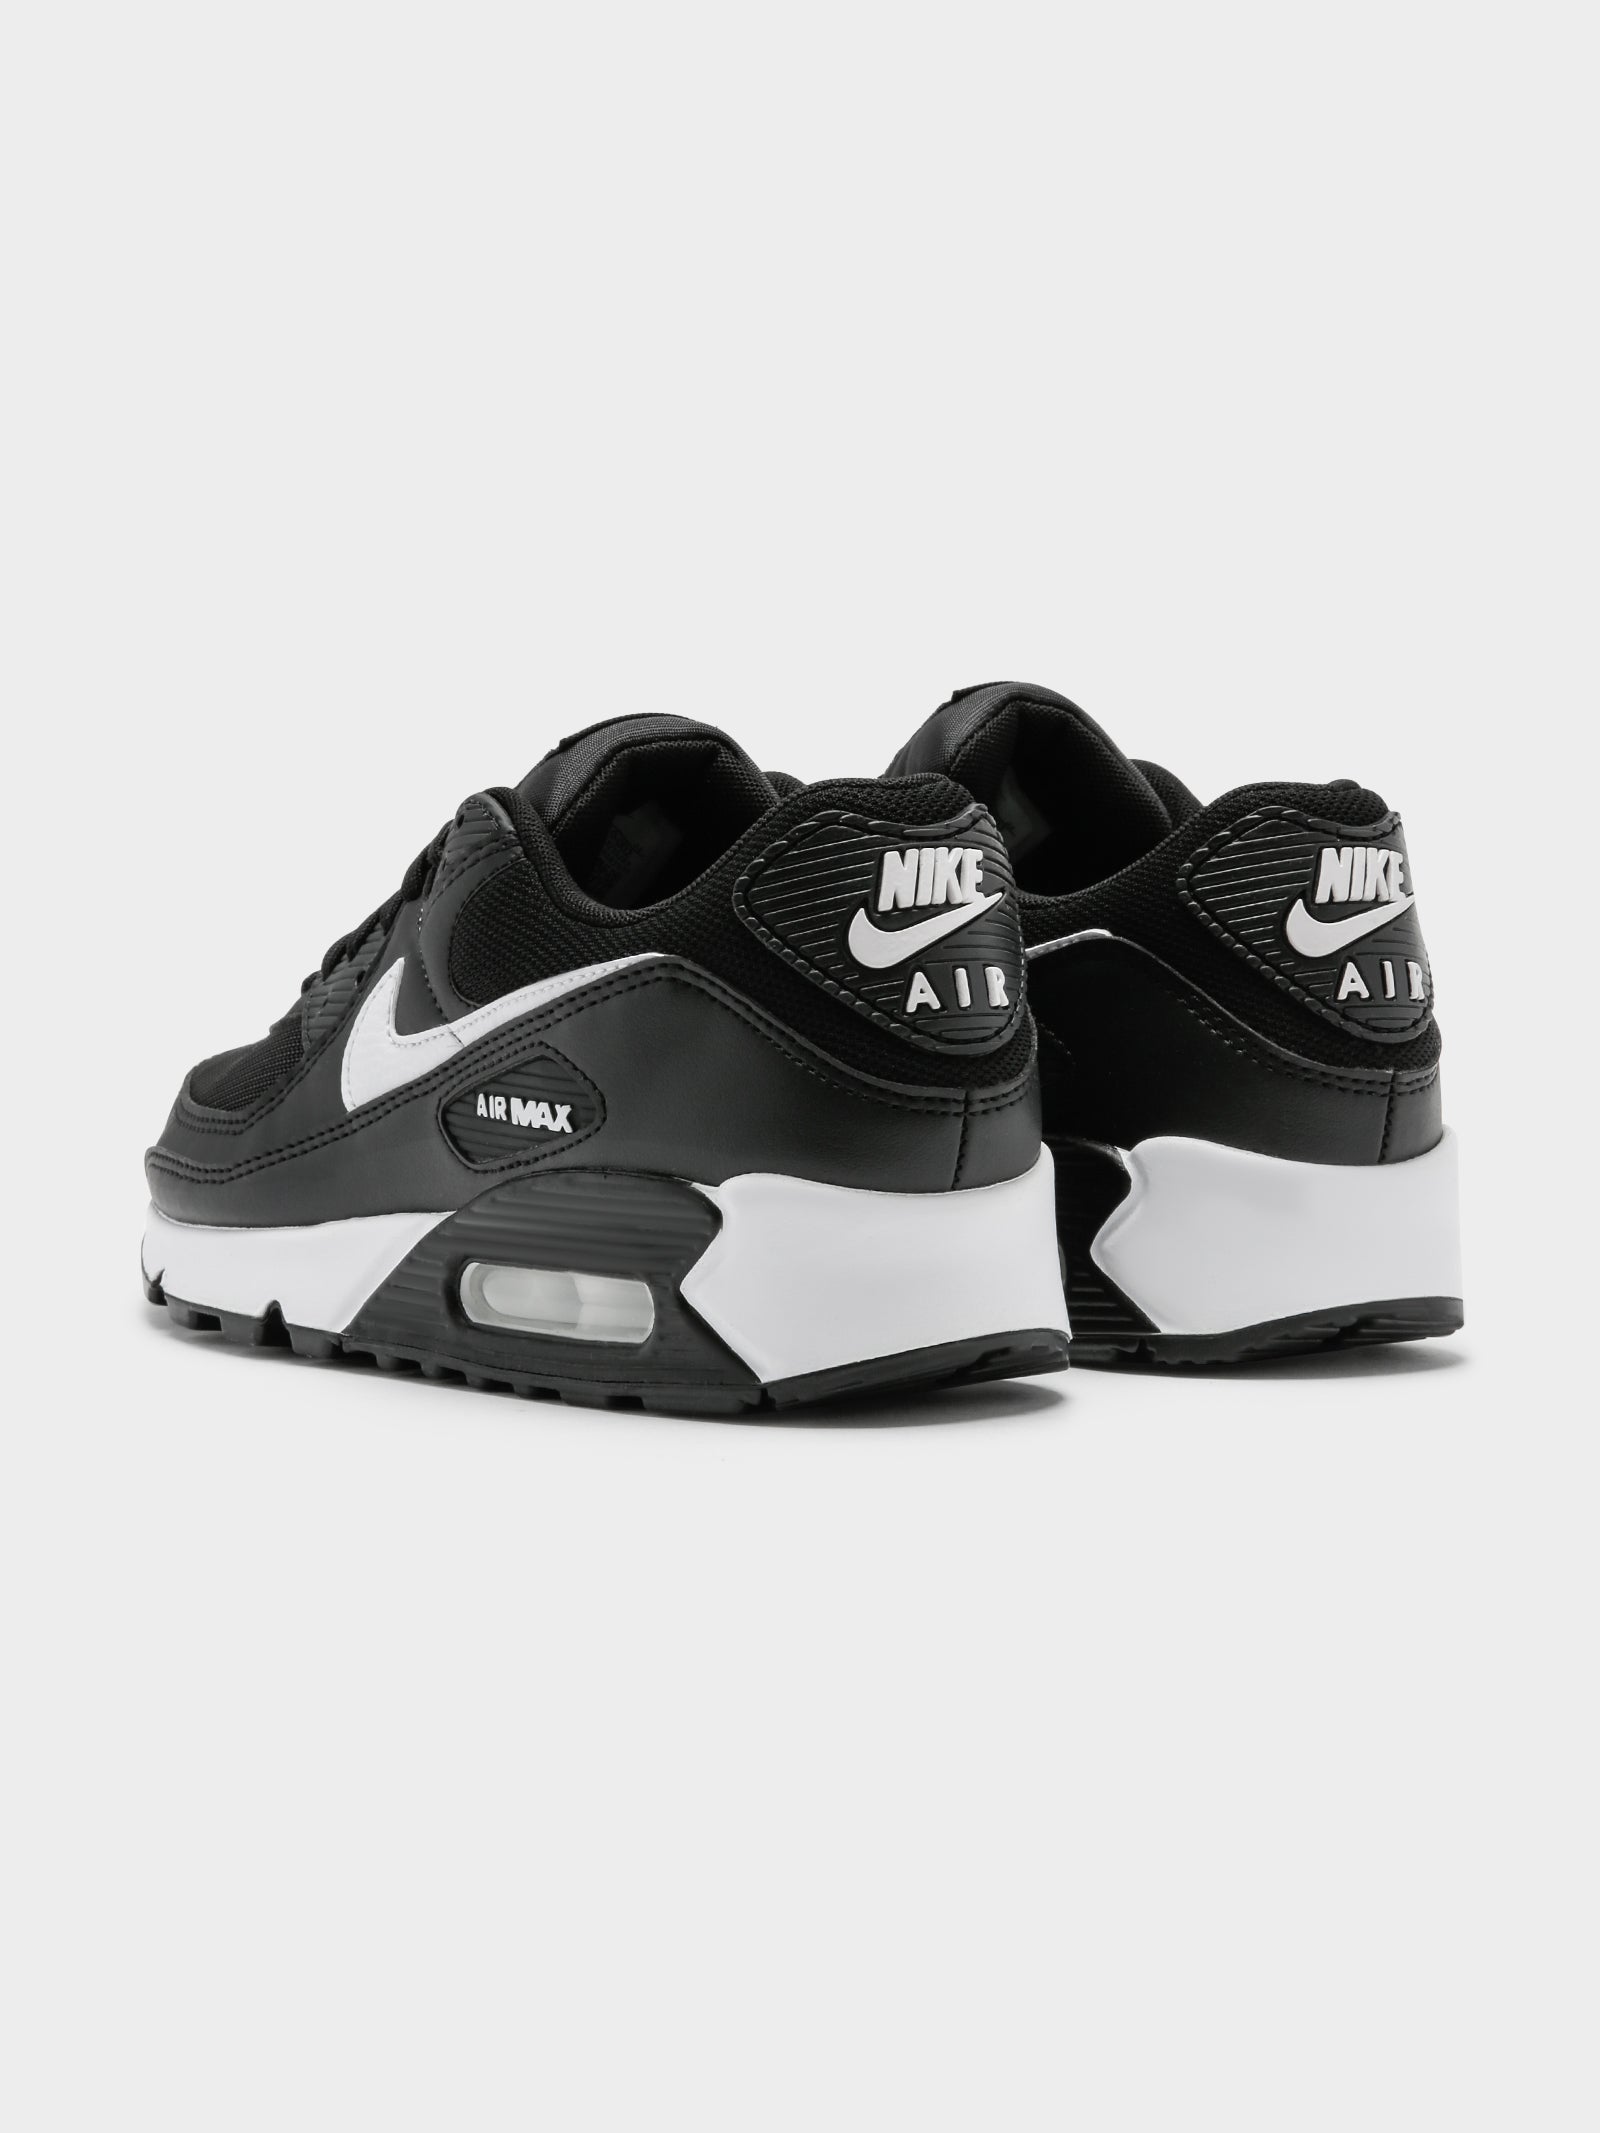 Womens Air Max 90 Sneakers in Black & White